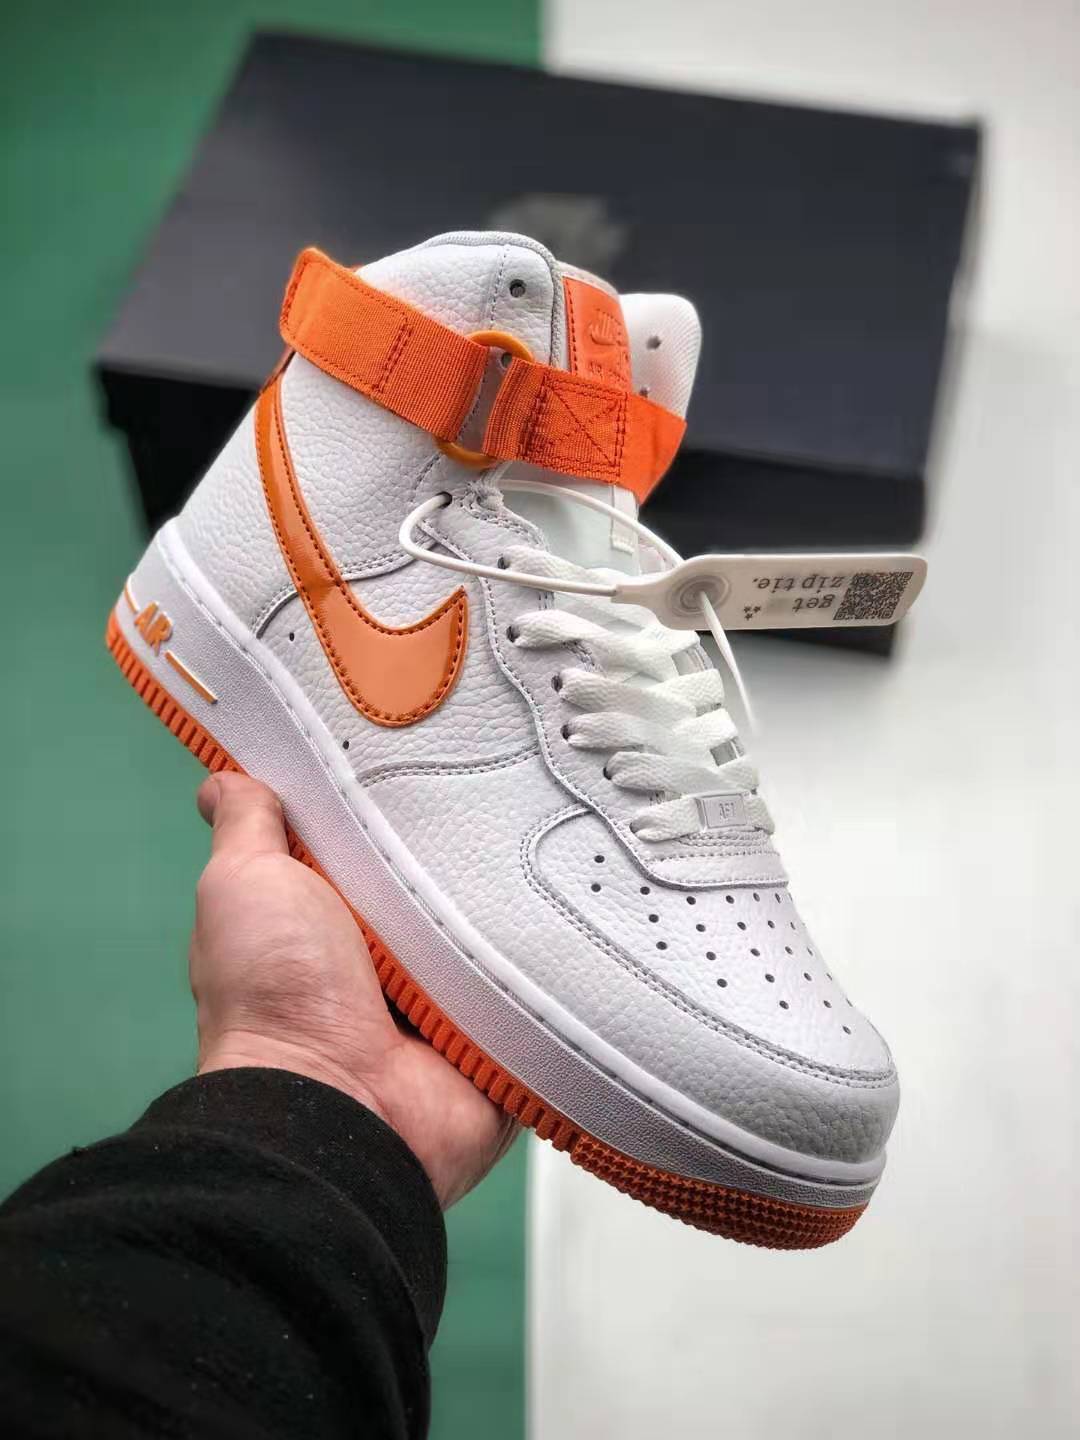 Nike Air Force 1 High 'Vibrant Orange' 334031-109 - Stylish and Trendy Sneakers